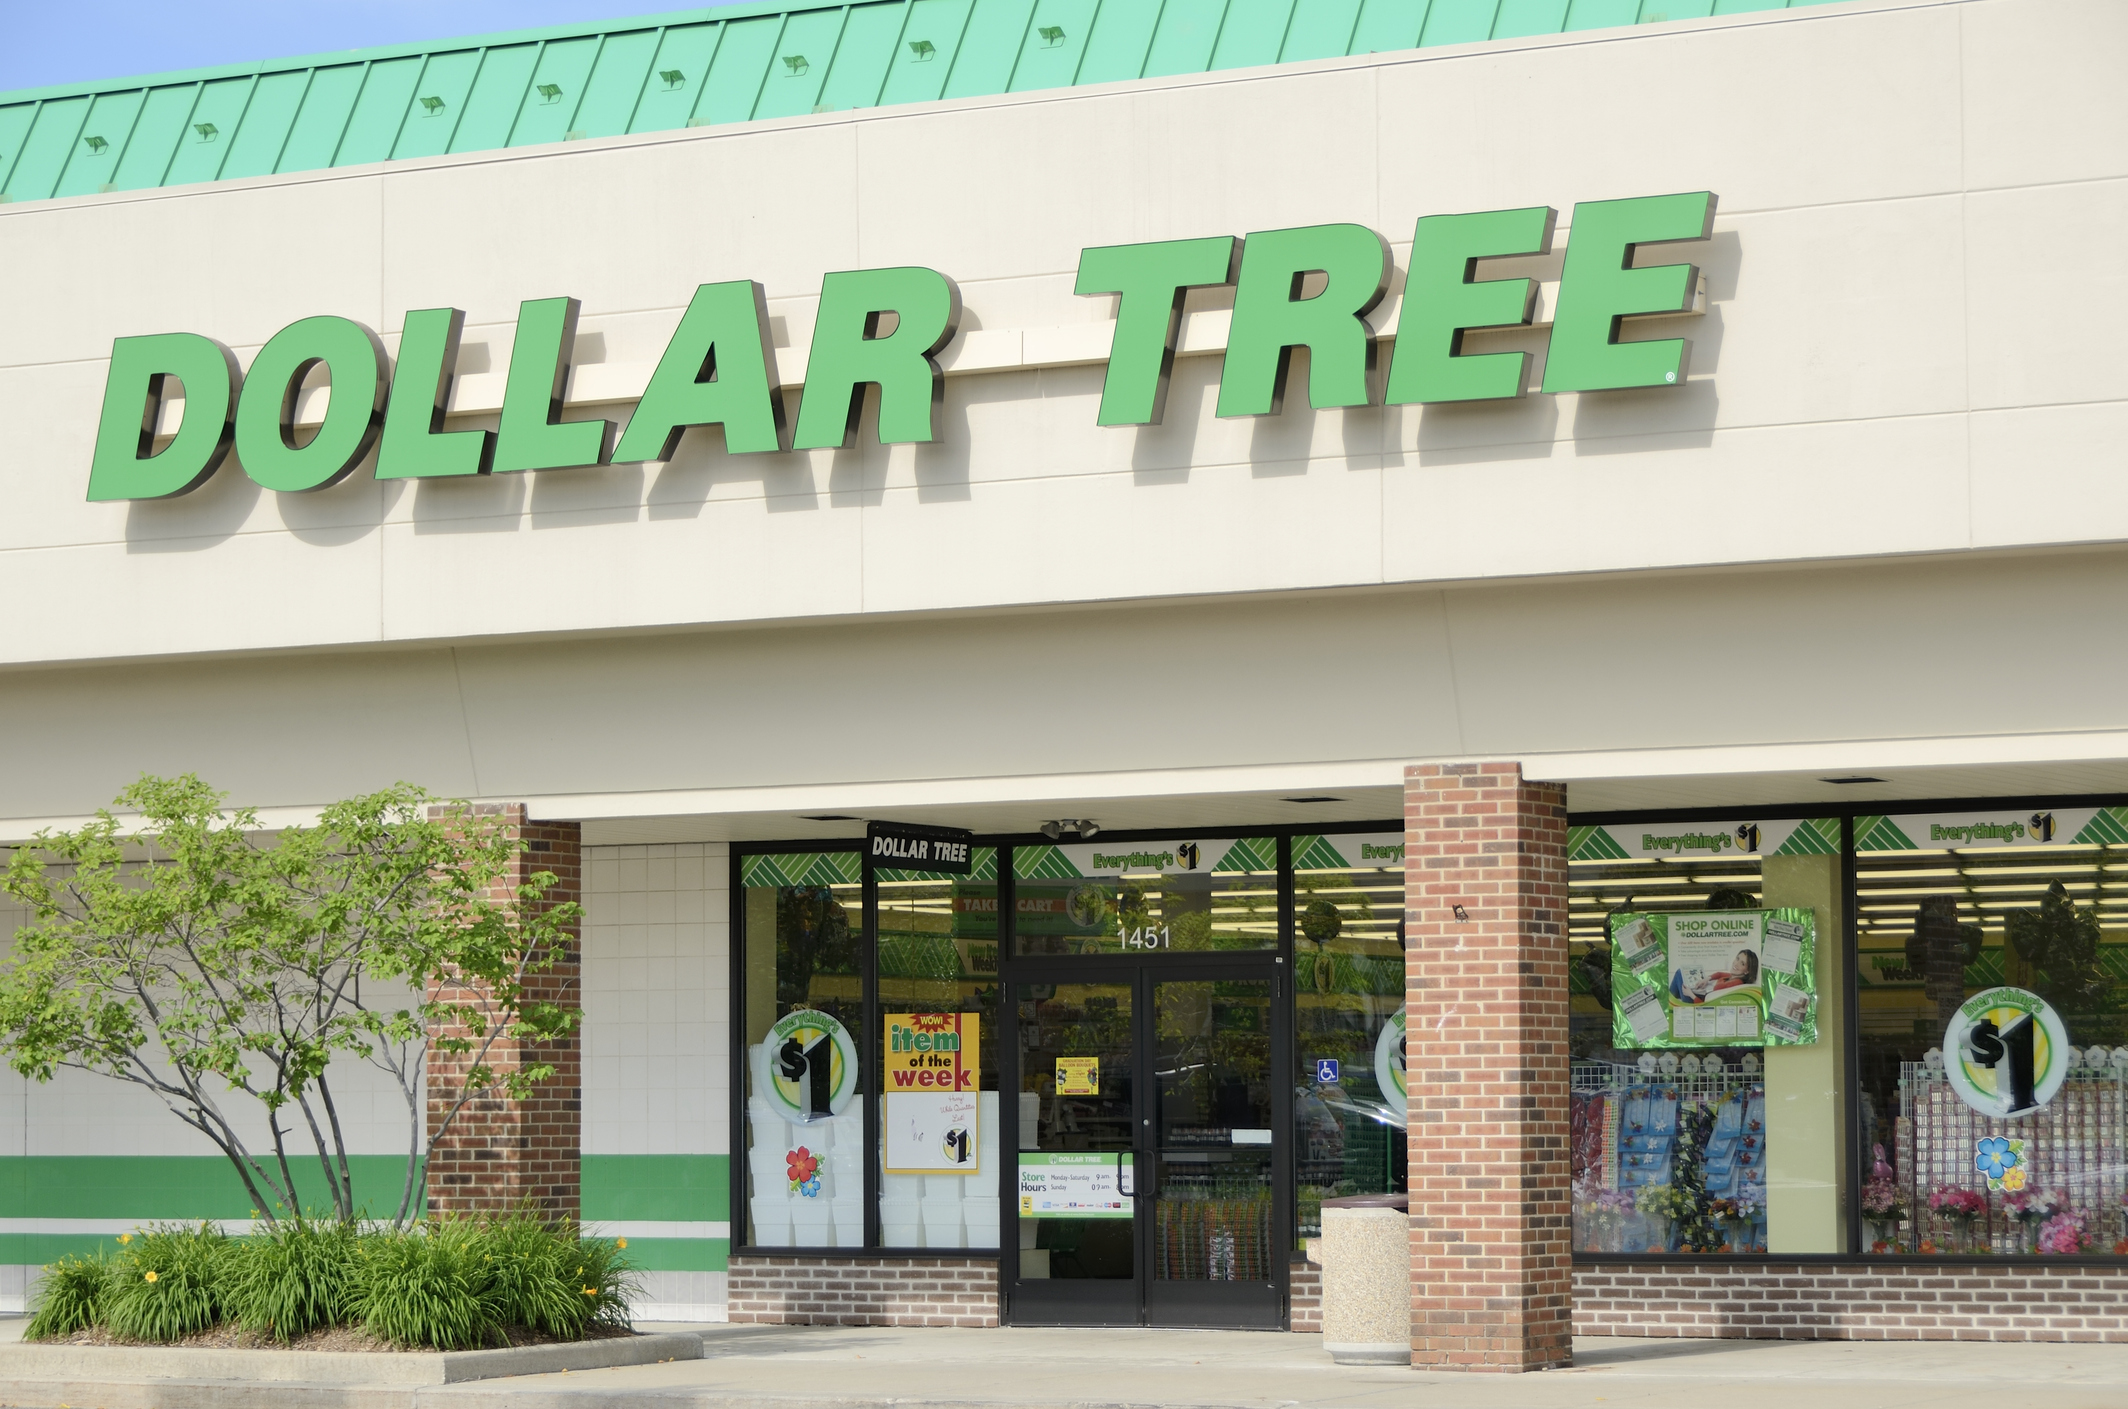 Is Everything 1 Dollar At Tree New Dollar Wallpaper HD